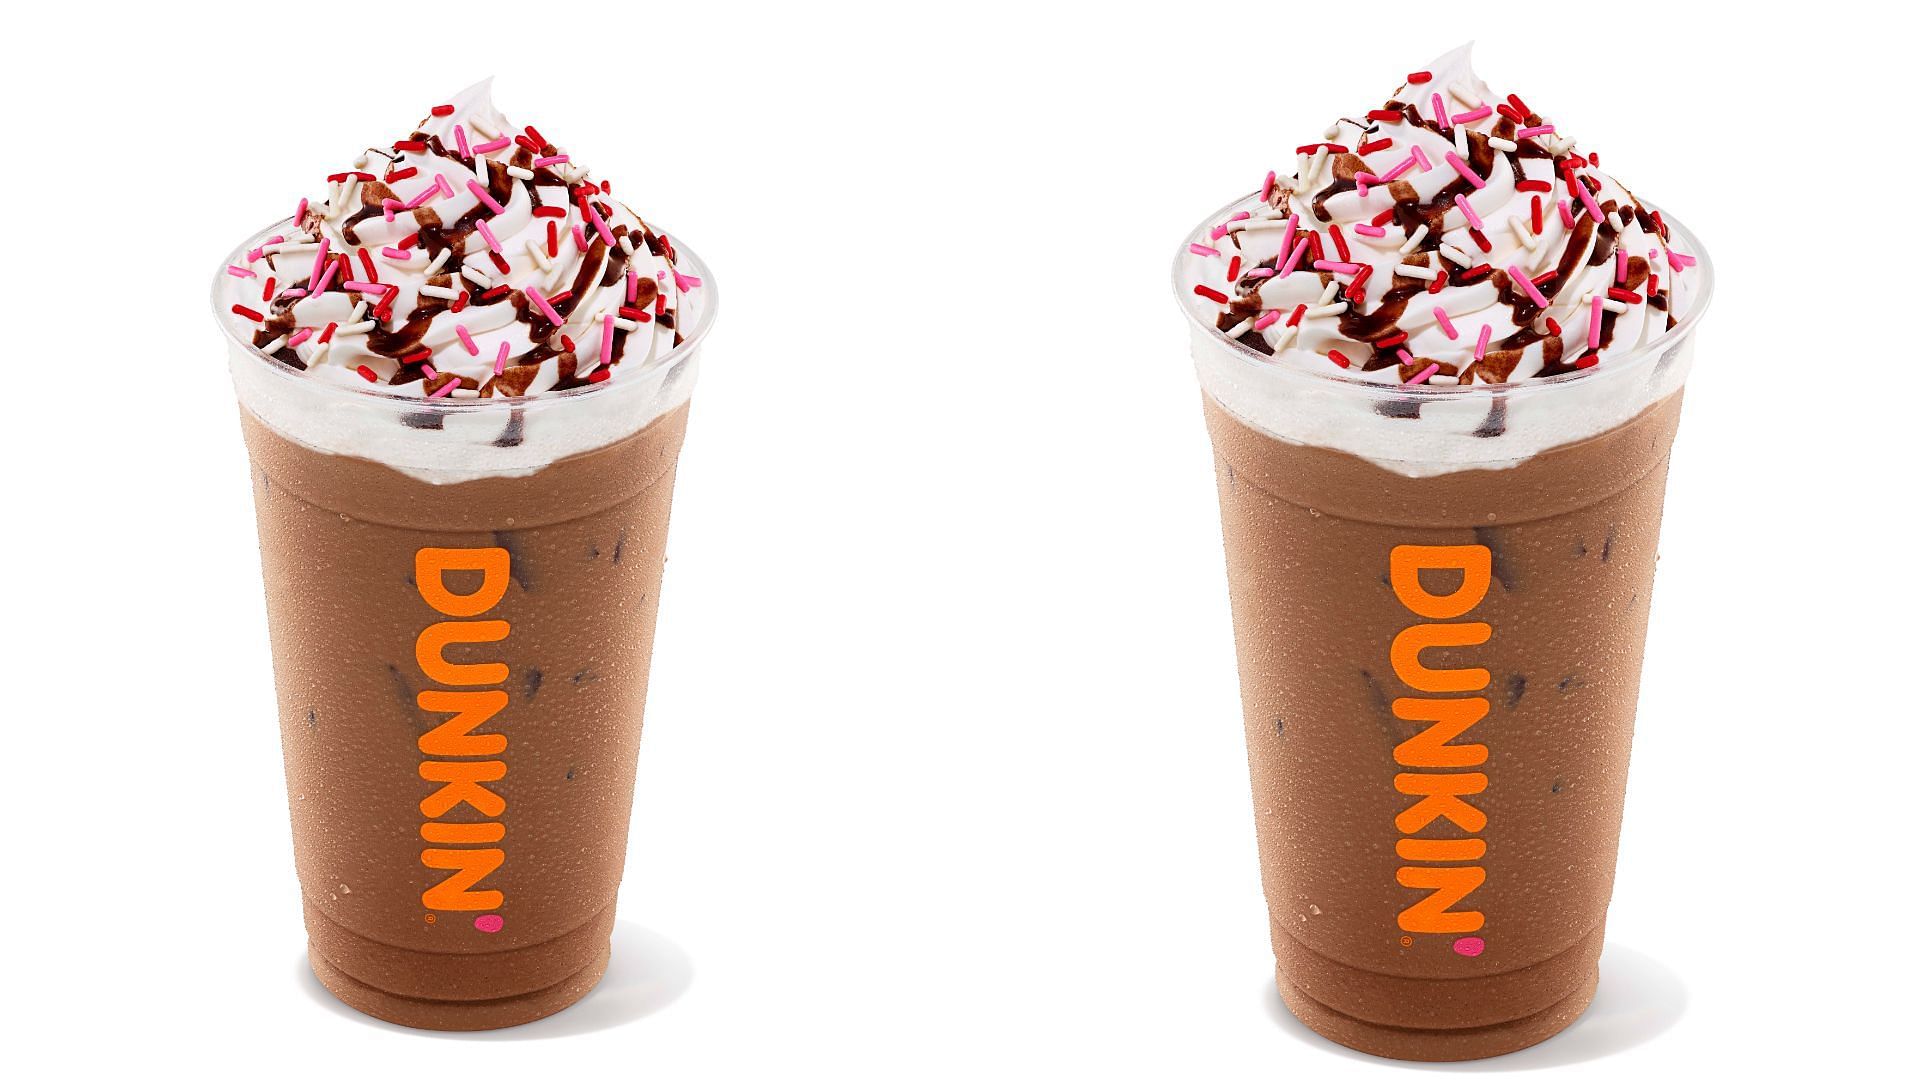 The Brownie Batter Signature Latte is inspired by the all-time favorite Brownie Batter Donut and will be available across the country starting February 1, 2023 (Image via Dunkin&rsquo; Donuts)